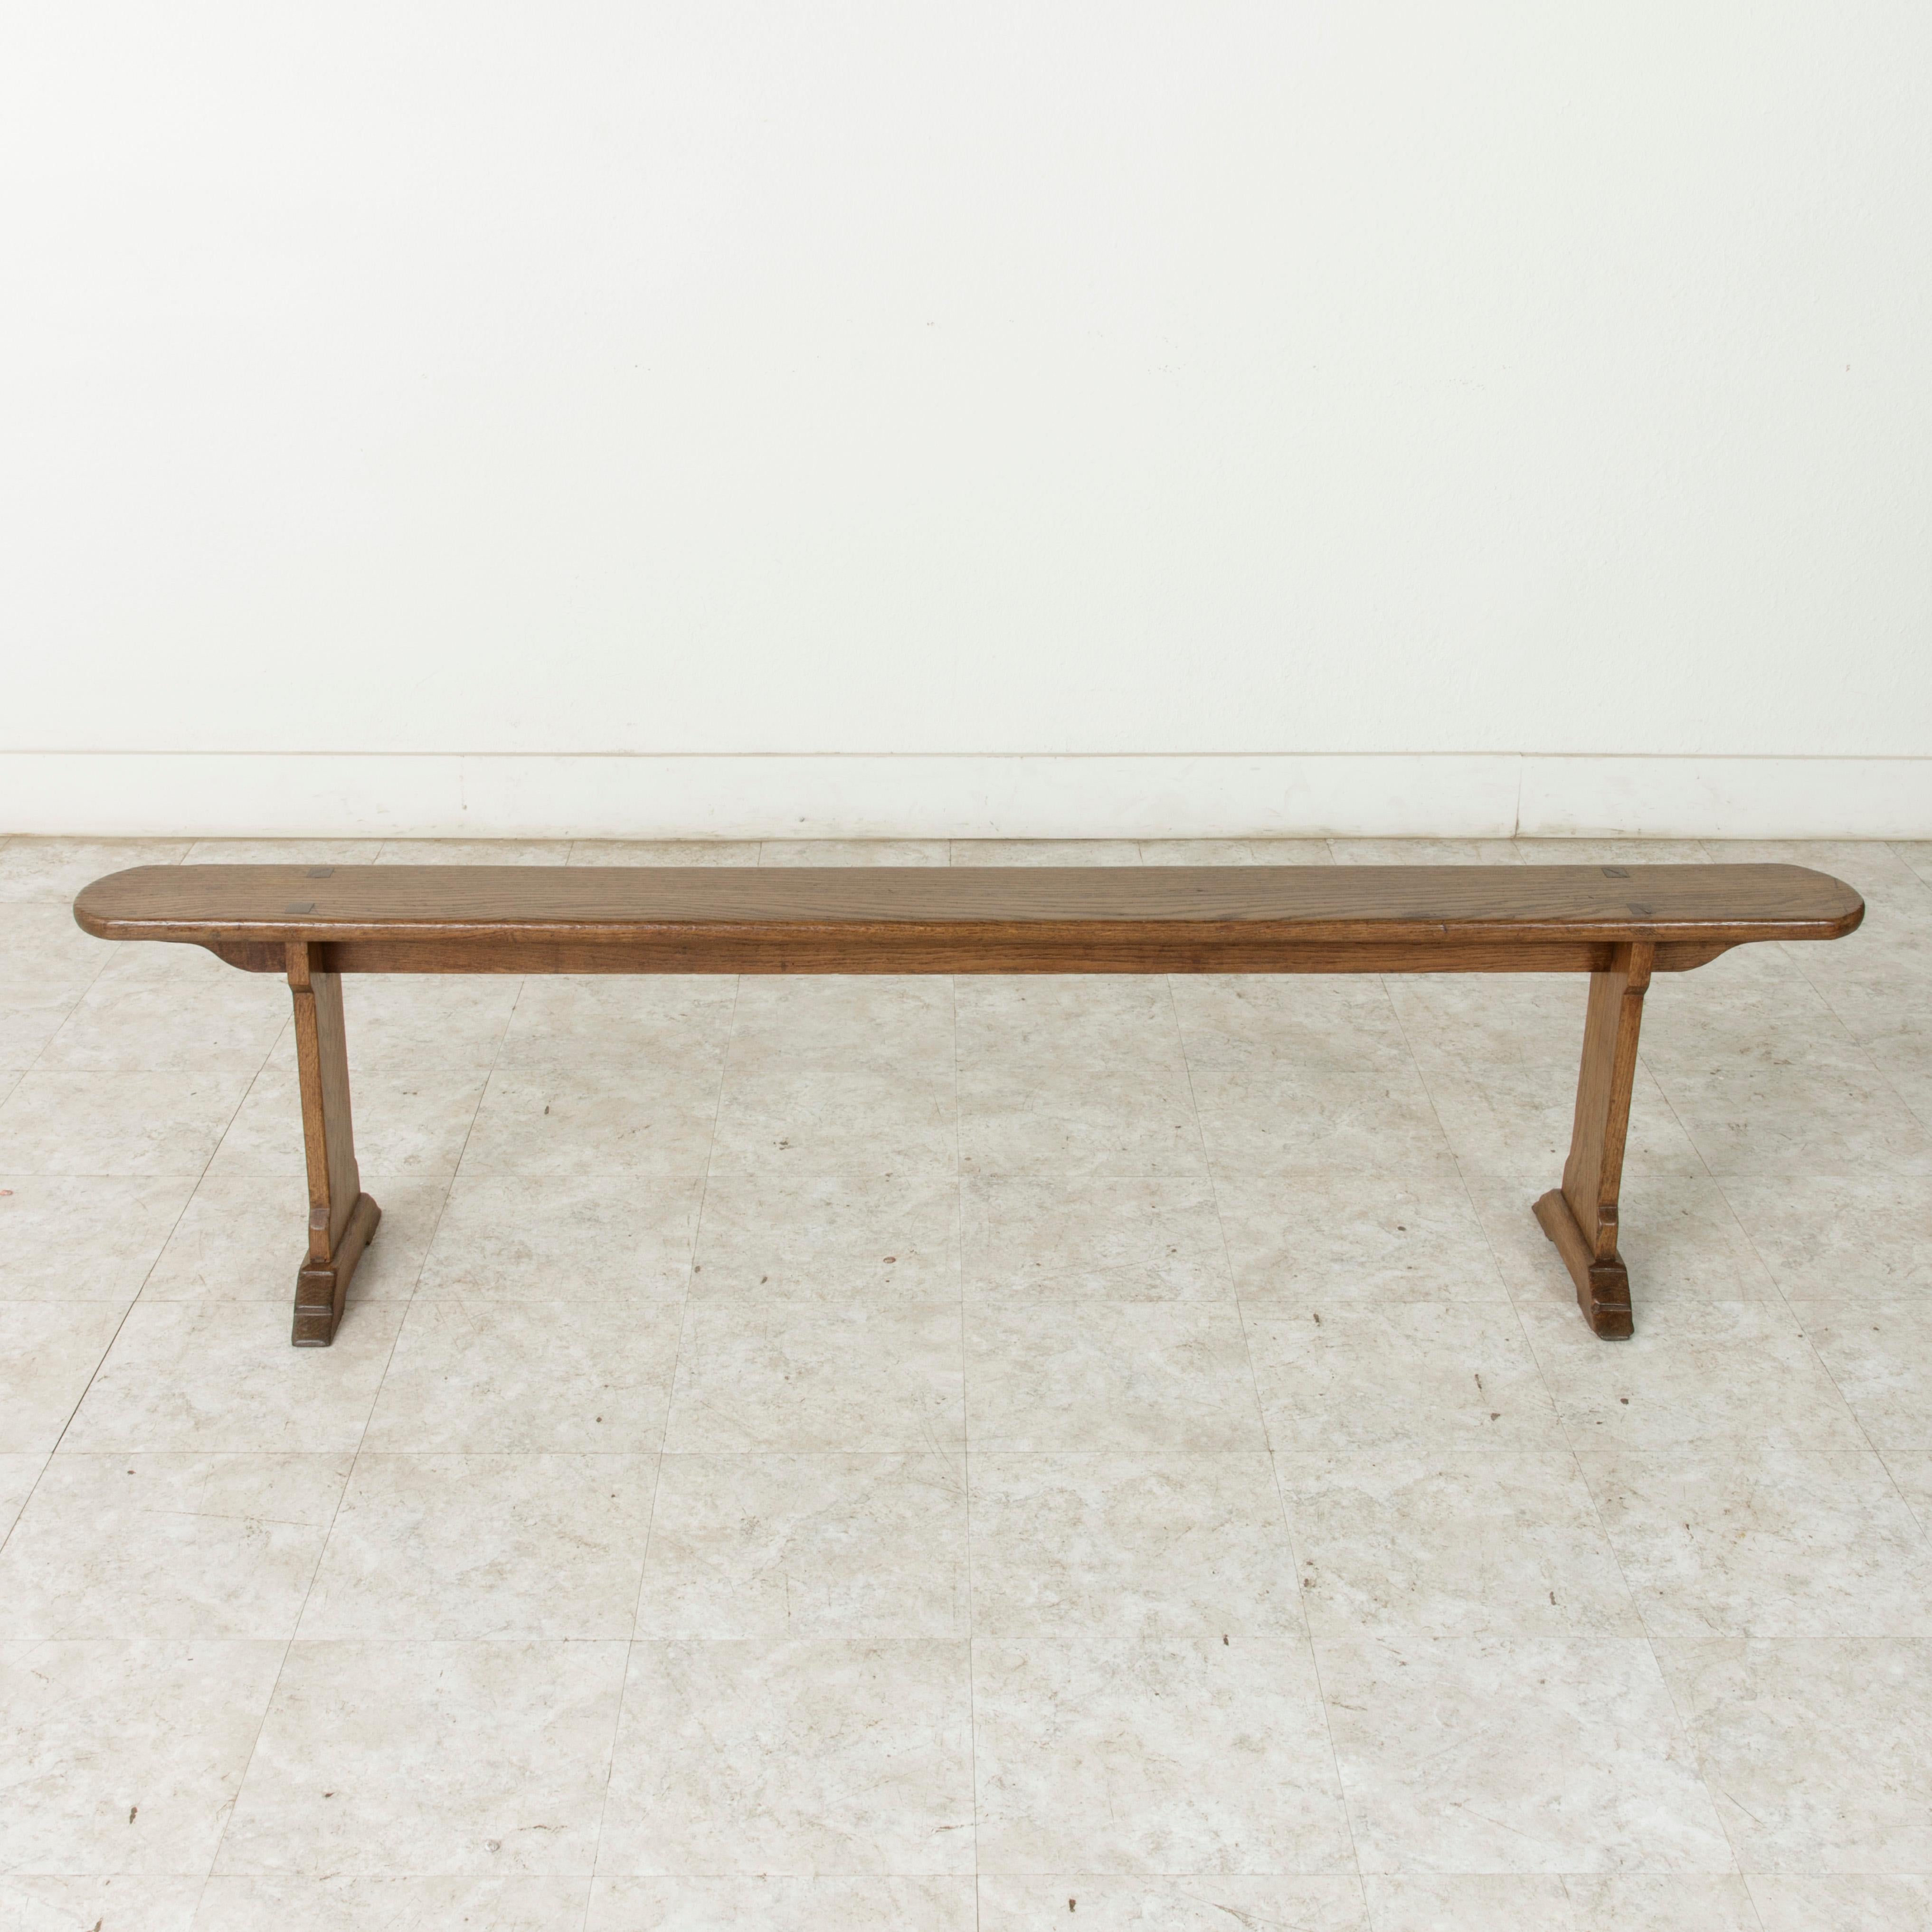 From the region of Normandy, France, this pair of early 20th century artisan-made oak benches measure 75 inches in length. Their seats rest on stretchers that extends their entire length. Seven inch wide seats rest on legs constructed with mortise